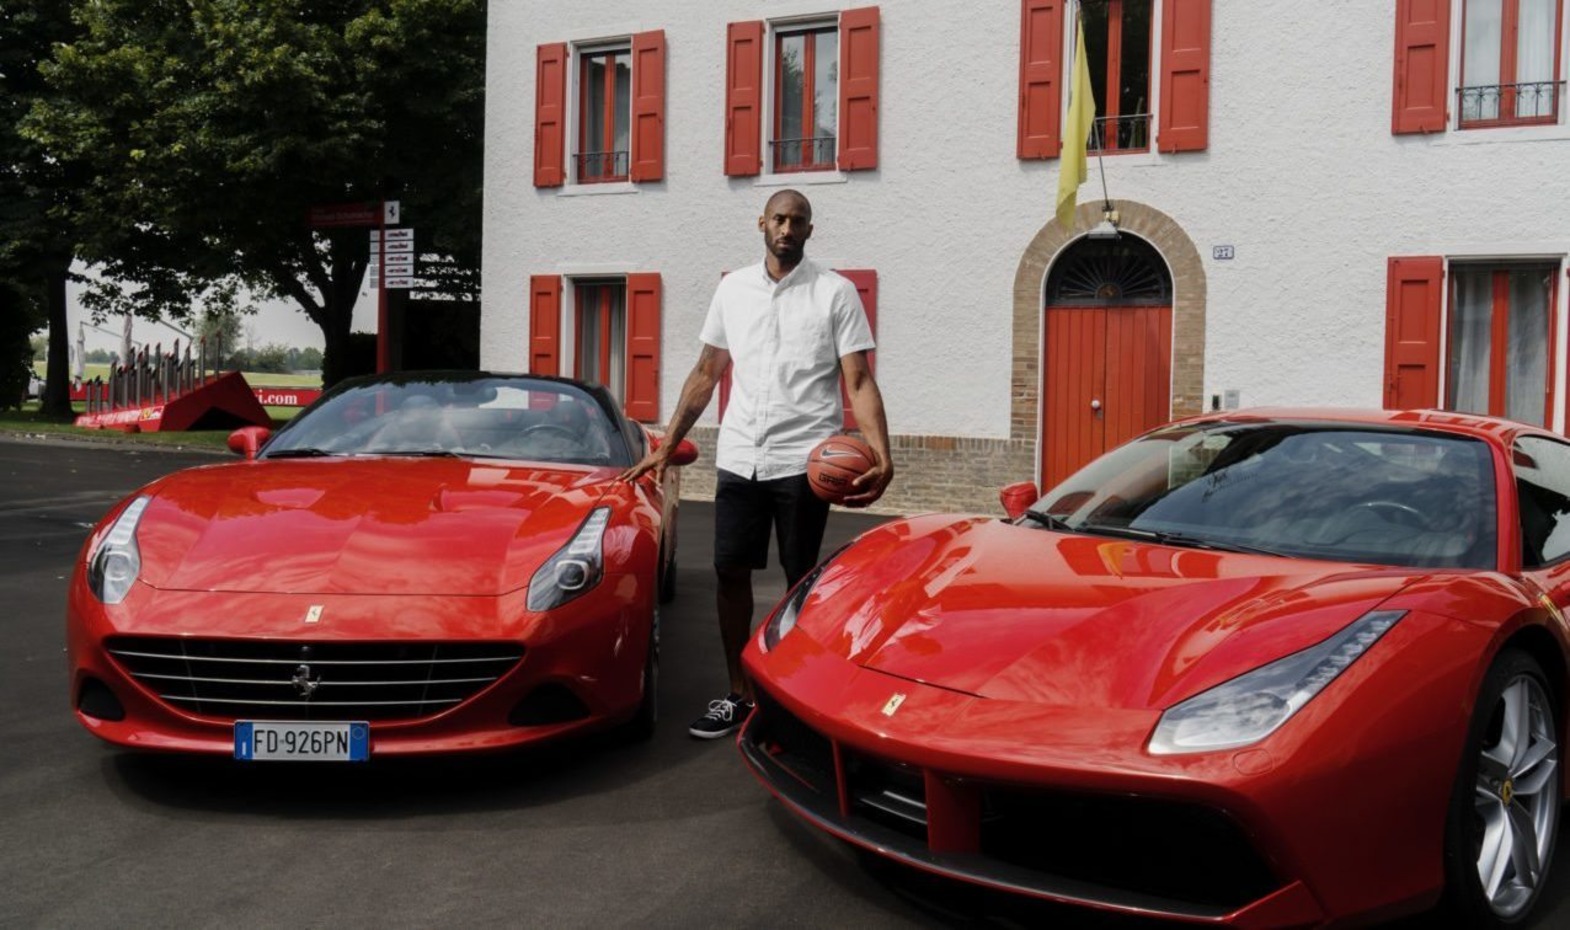 bao to demonstrate his respect for his idol lebron james surprised the world by gifting a ferrari f supercar to michael jordan on his th birthday 65411e5c77bfd To Demonstrate His Respect For His Idol, Lebron James Surprised The World By Gifting A Ferrari F430 Supercar To Michael Jordan On His 60th Birthday.